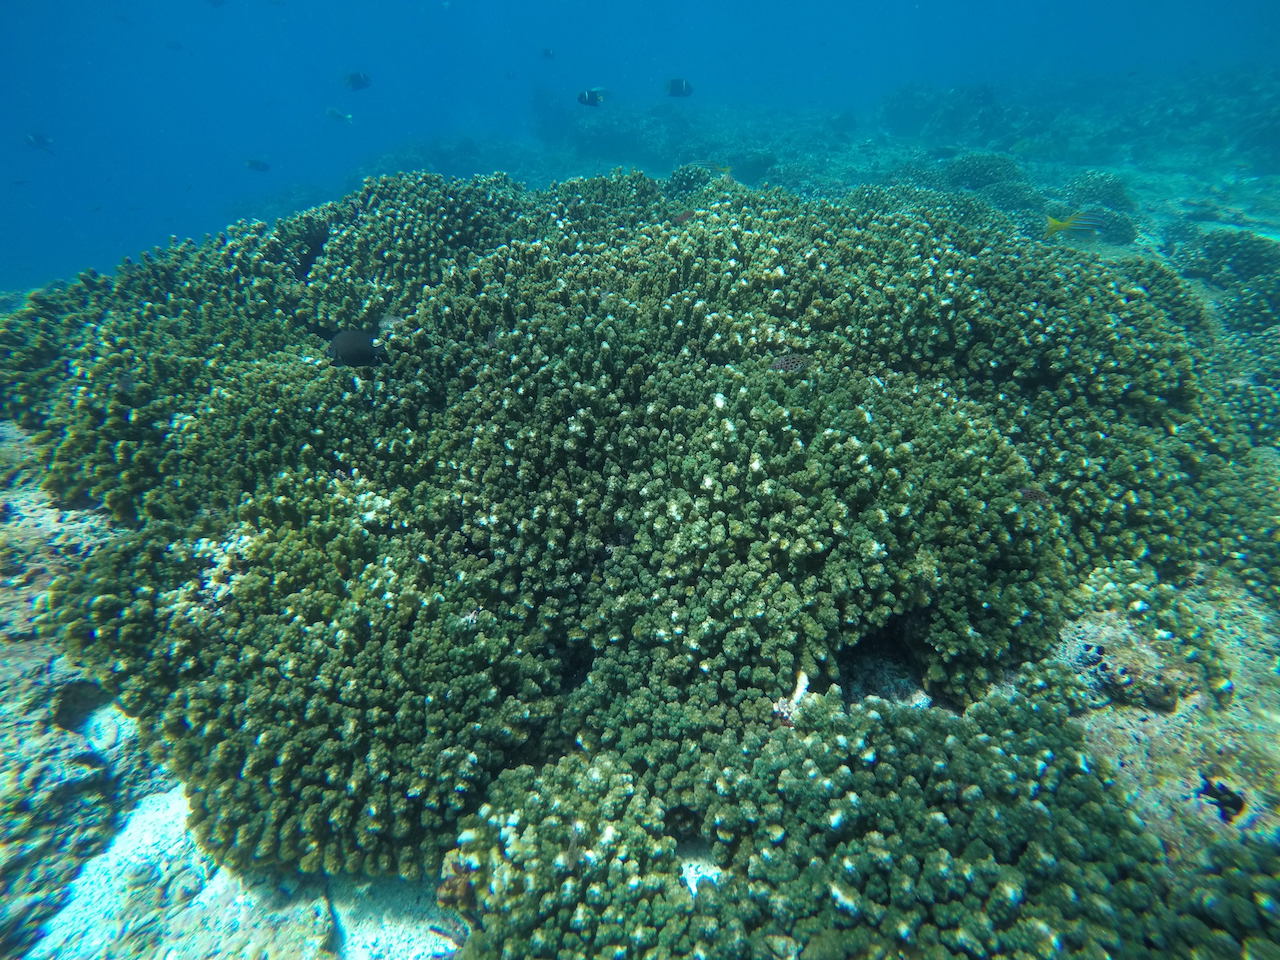 Pocillopora corals are dominant in the ETP. A single large Pocillopora colony growing on Isla Champion in the Galápagos Islands, Ecuador.